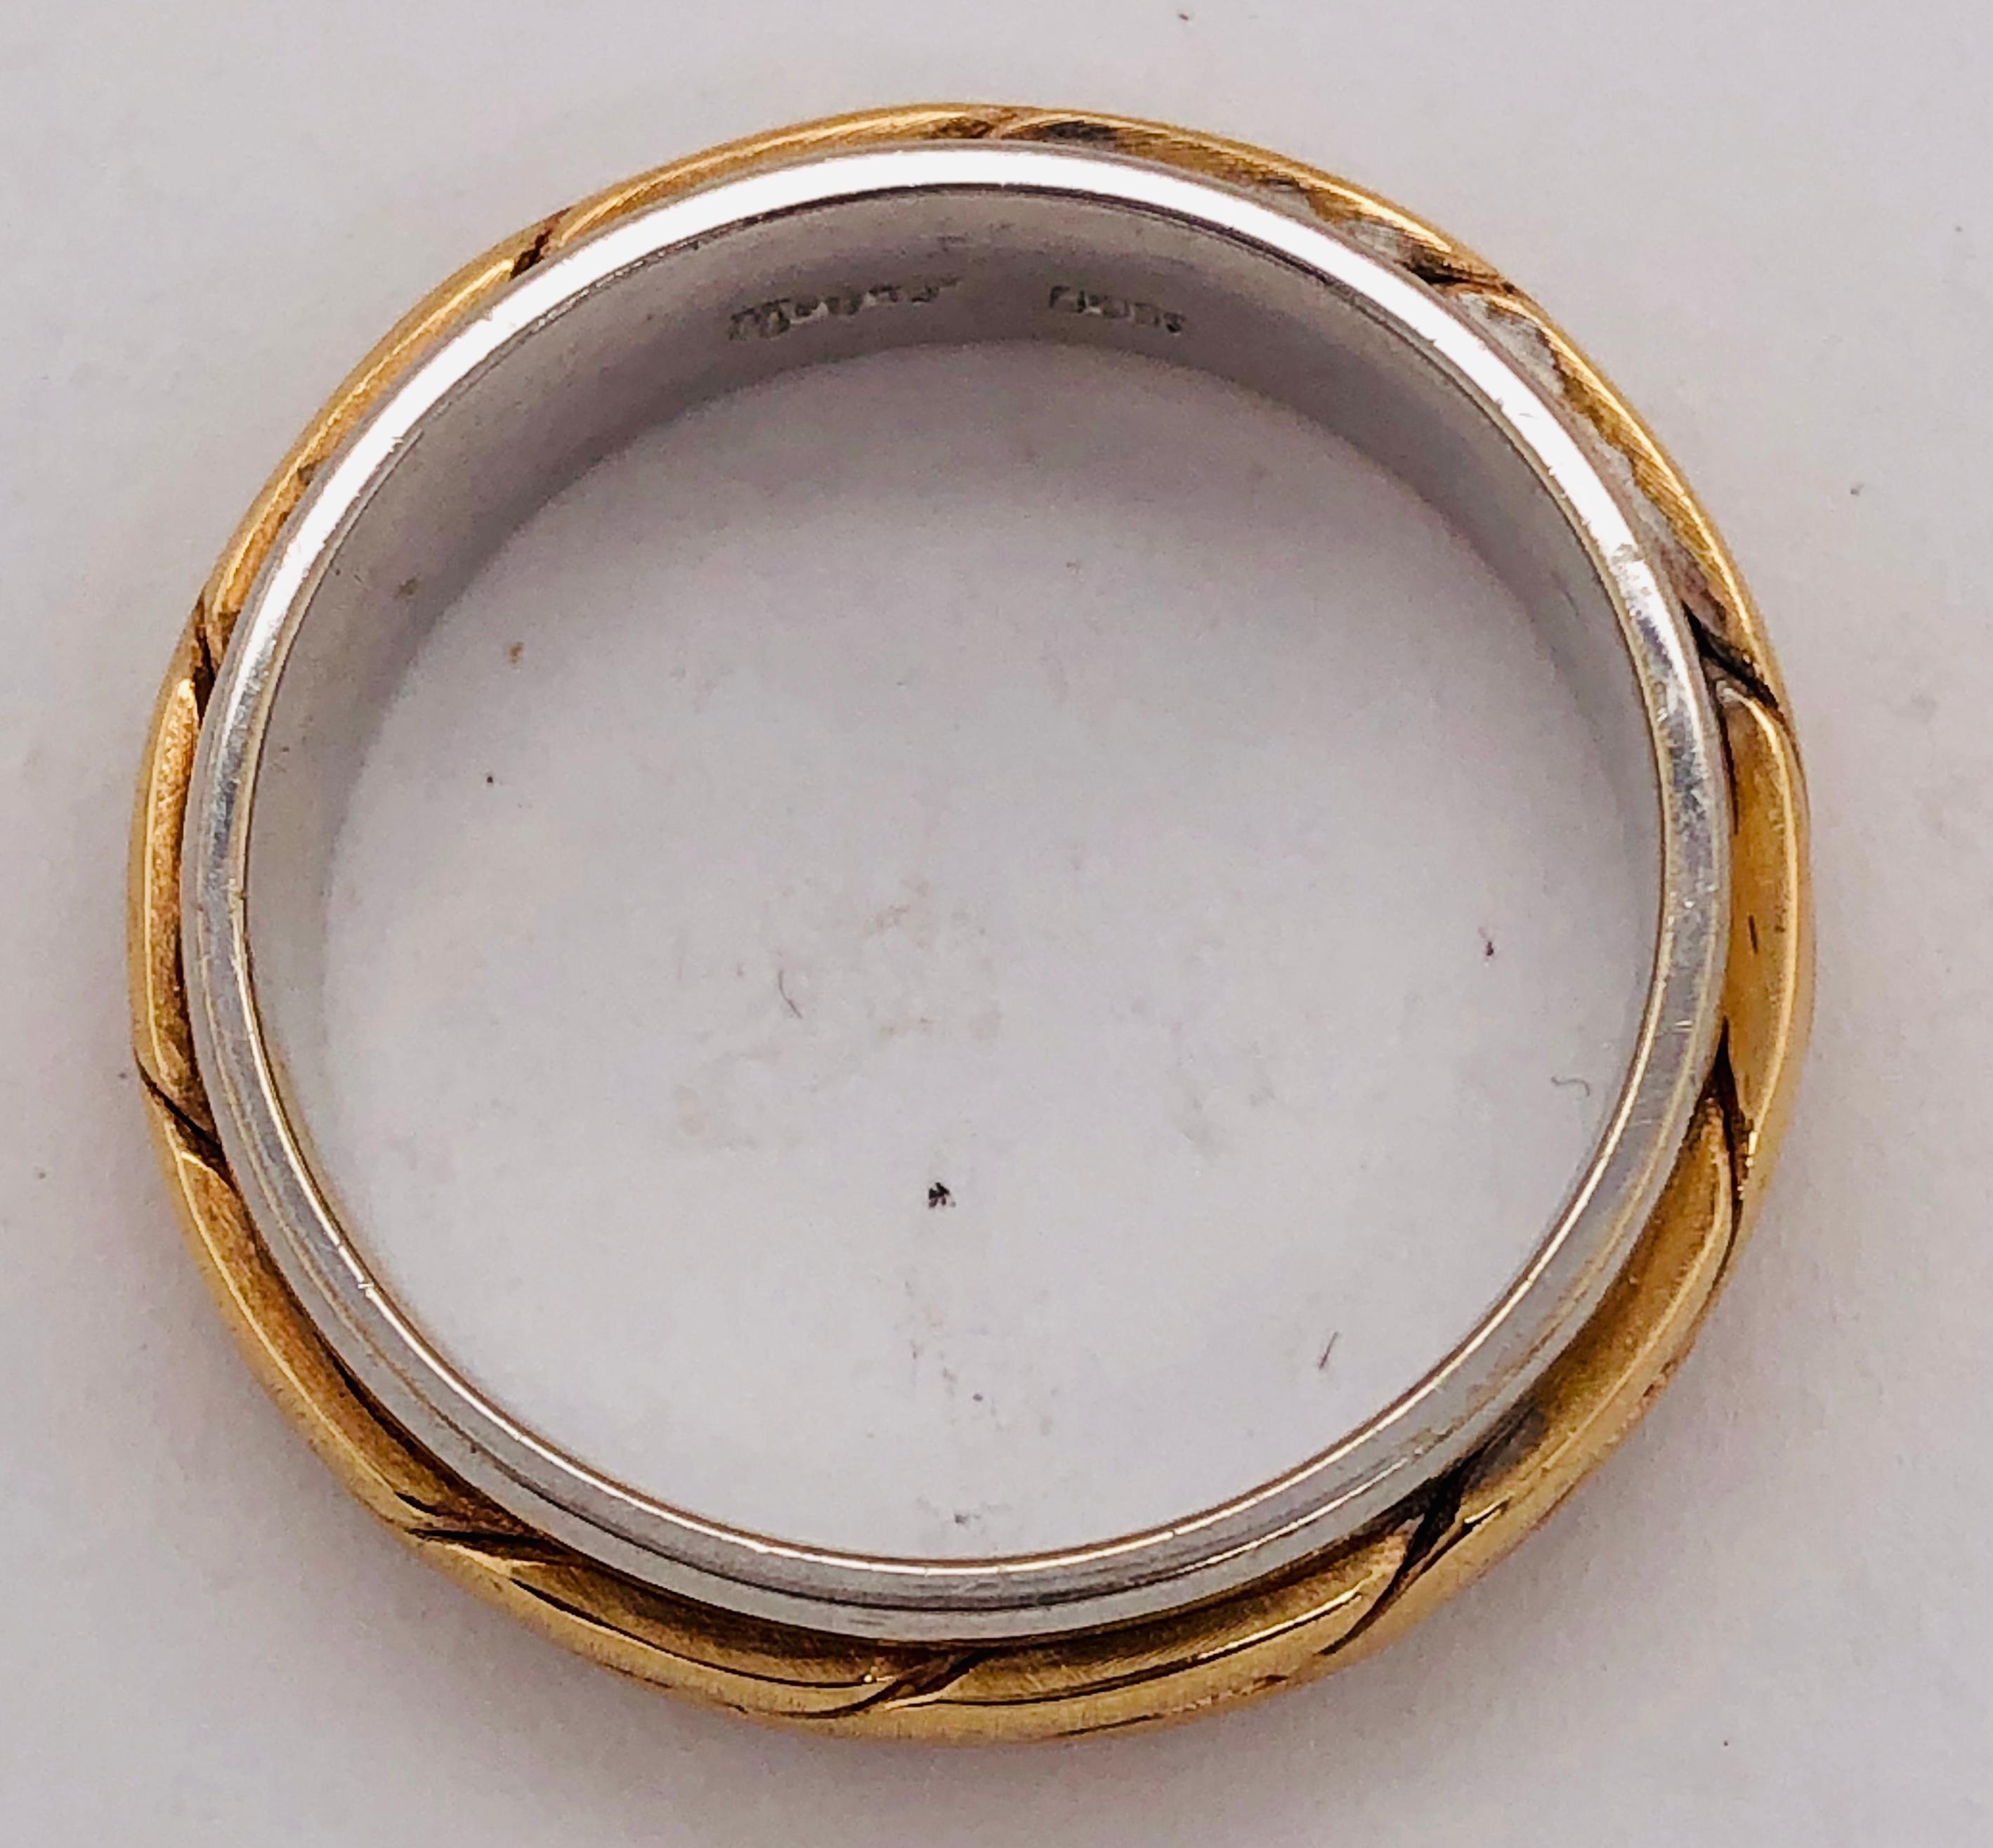 14 Karat Two-Tone Gold Braid Styled Band or Wedding Ring In Good Condition For Sale In Stamford, CT